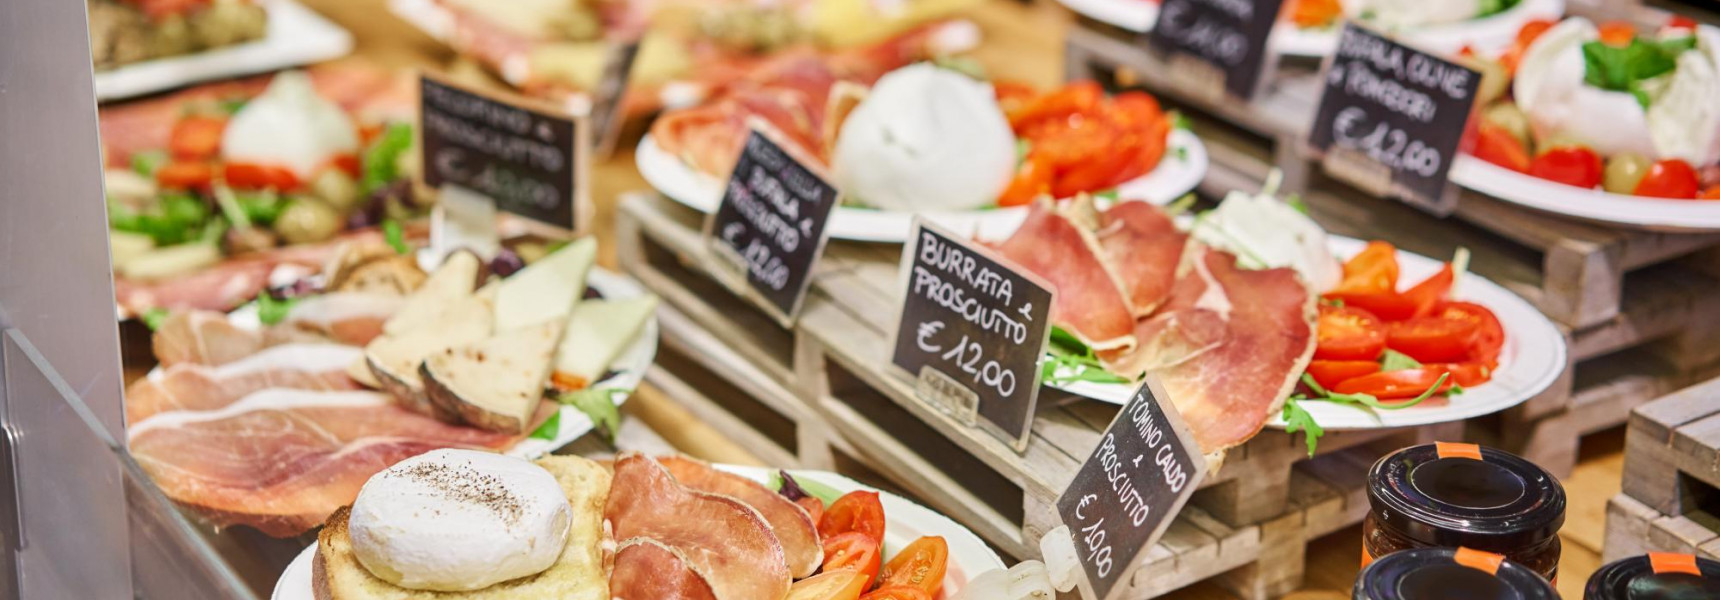 Top 5 Florence Food Tours that Sample Local Produce